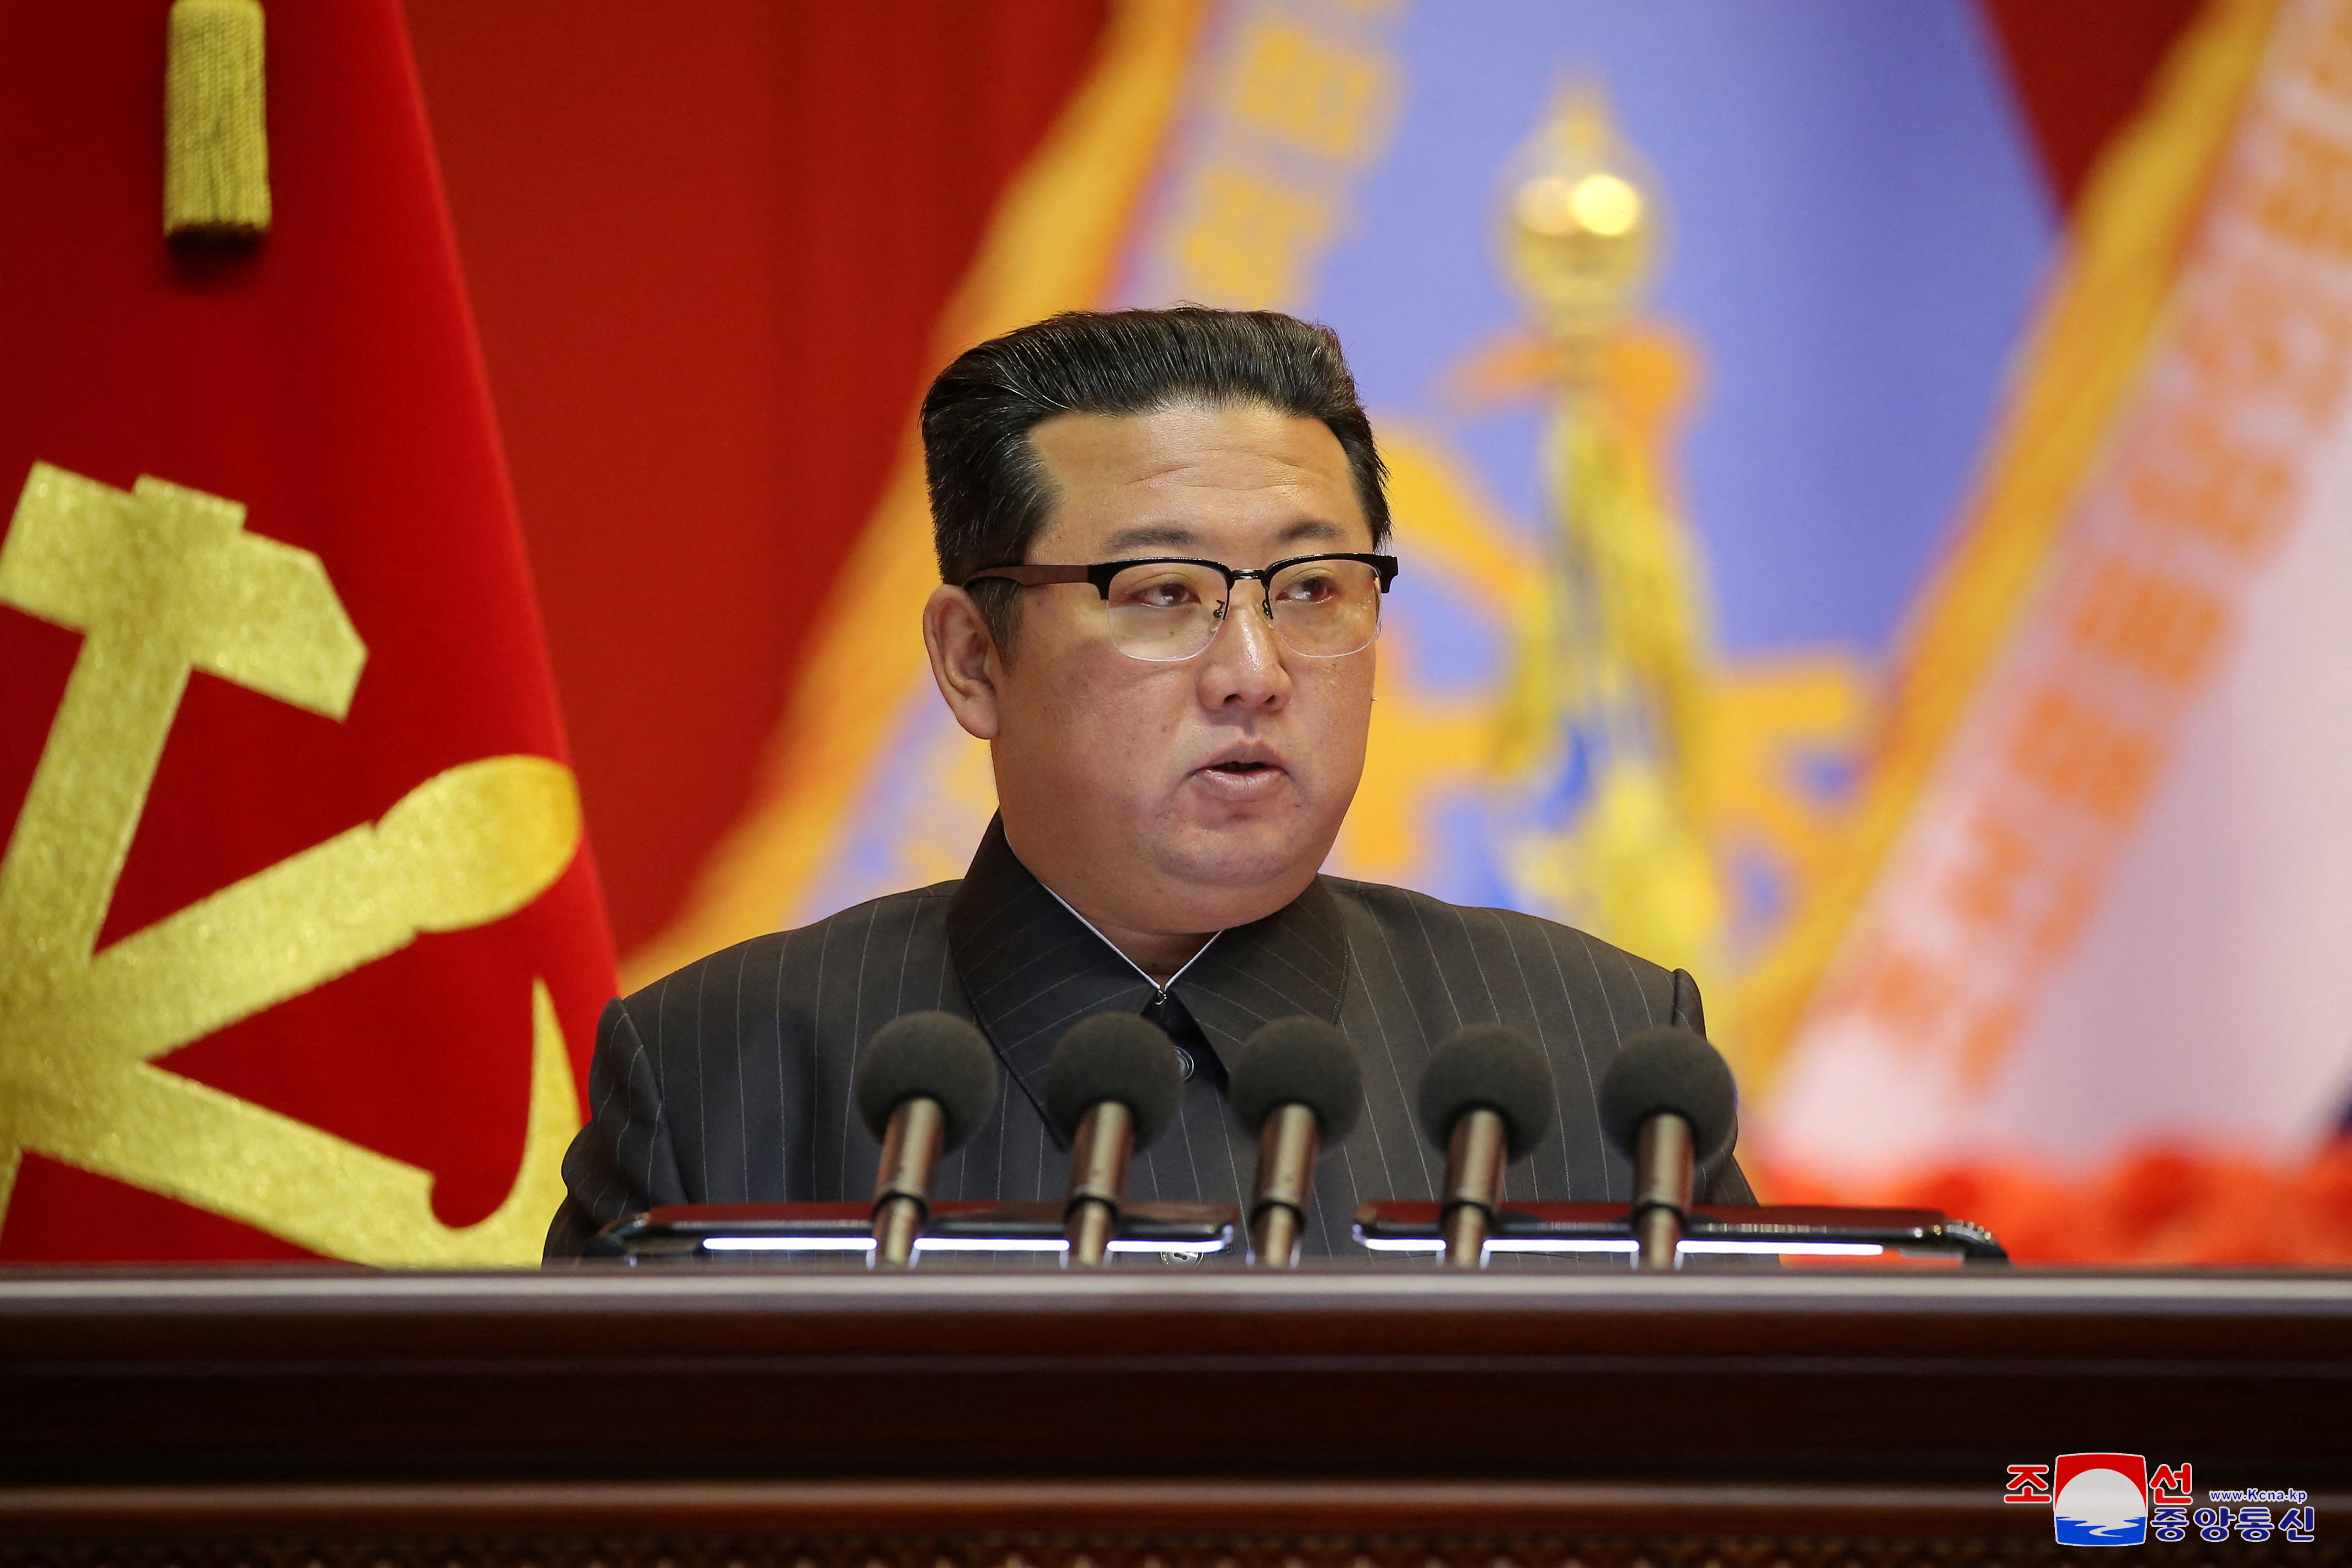 North Korean leader Kim Jong Un speaks during the Eighth Conference of Military Educationists of the Korean People's Army at the April 25 House of Culture in Pyongyang, North Korea in this undated photo released on December 7, 2021. KCNA via REUTERS 